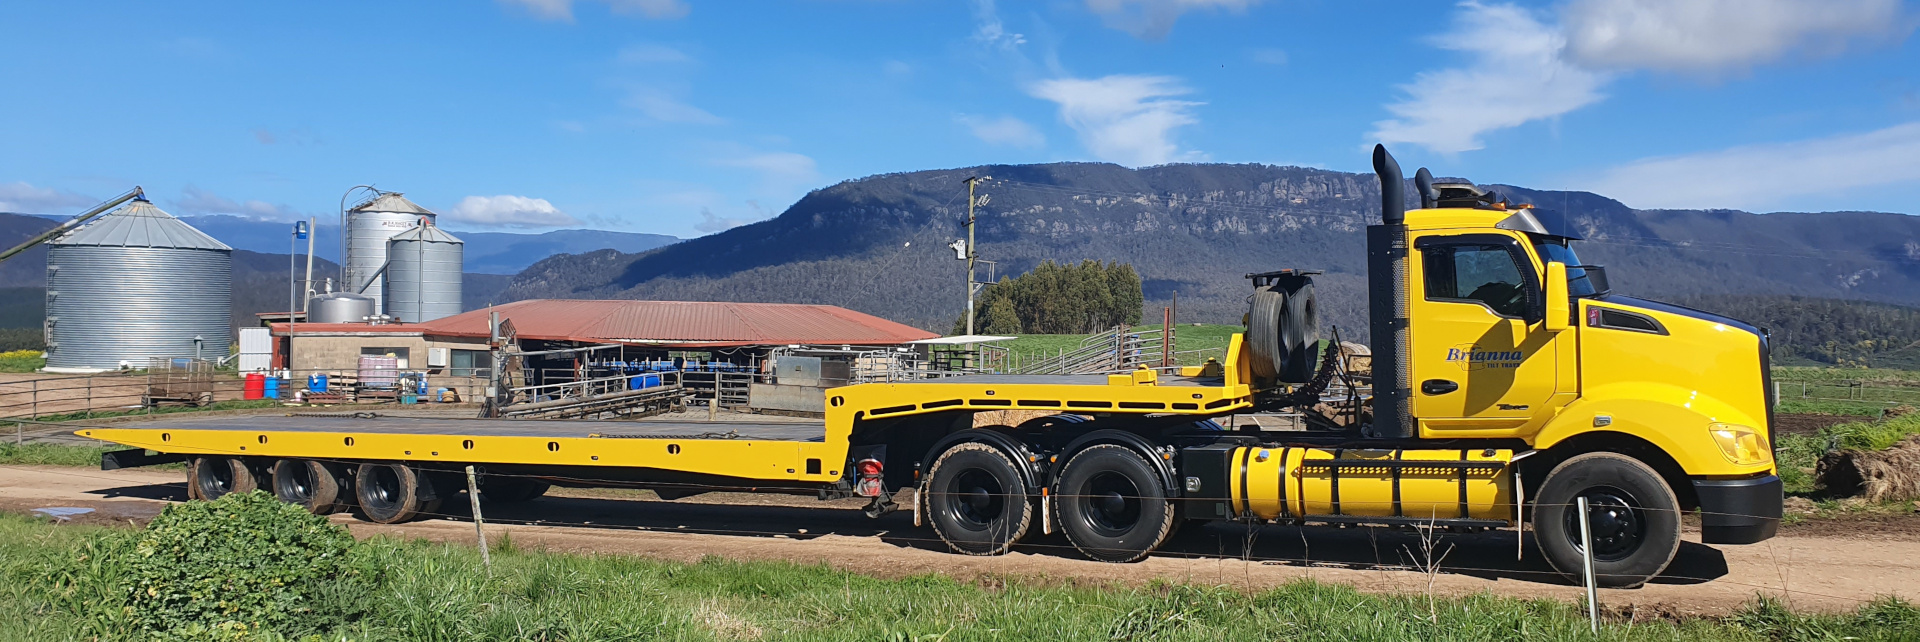 Brianna Tilt Trays Towing Pty Ltd Getting Noticed In Tasmania Business View Oceania